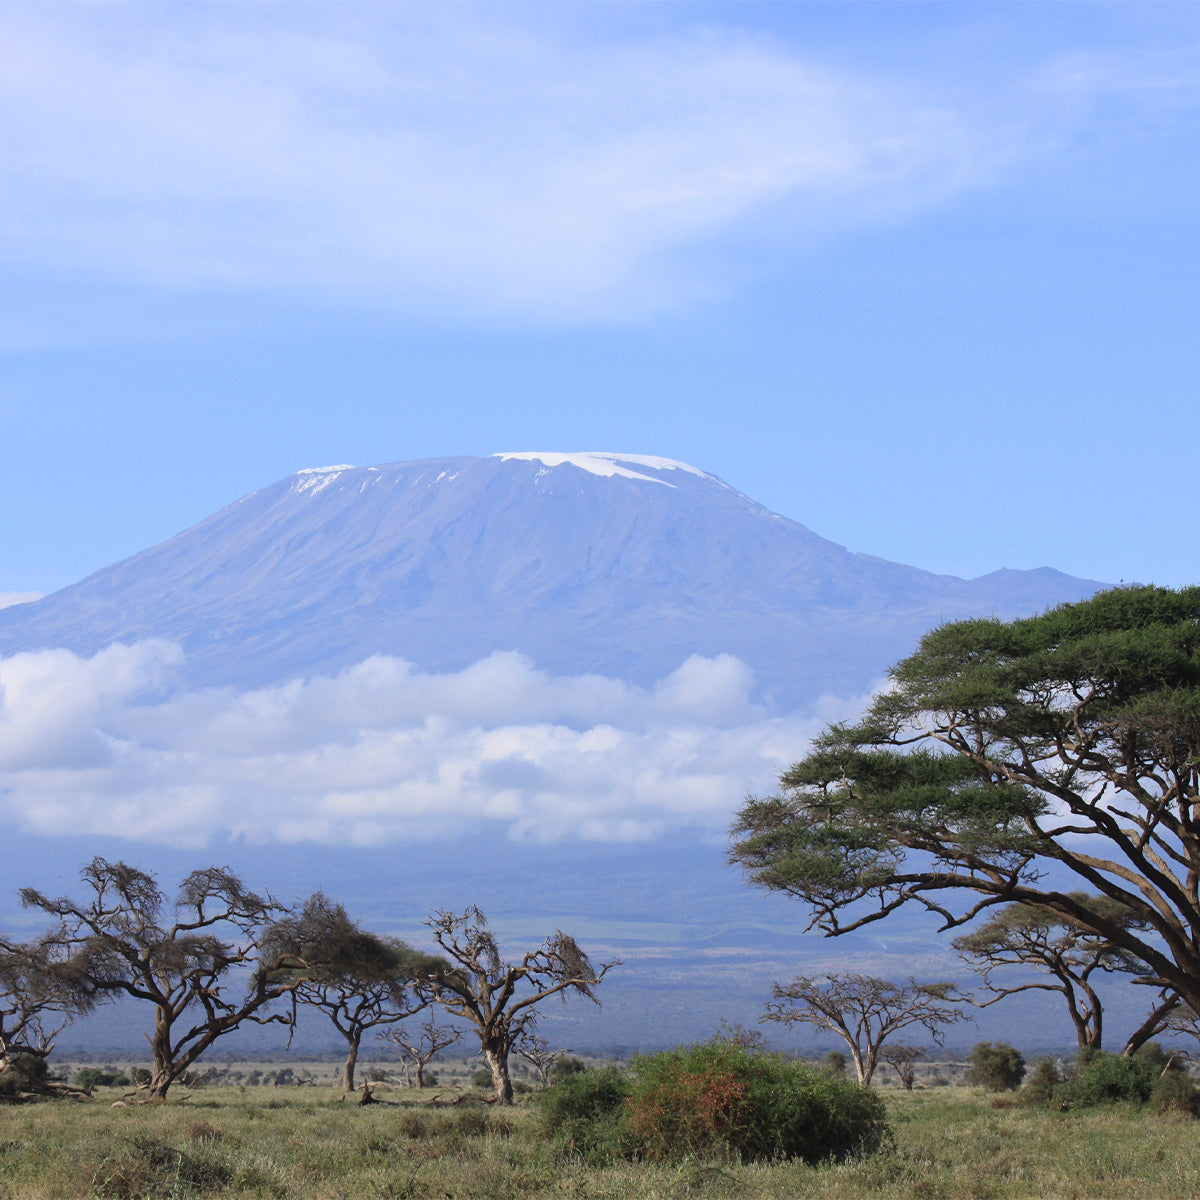 Mount Kilimanjaro with the grass lands in front of the mountain